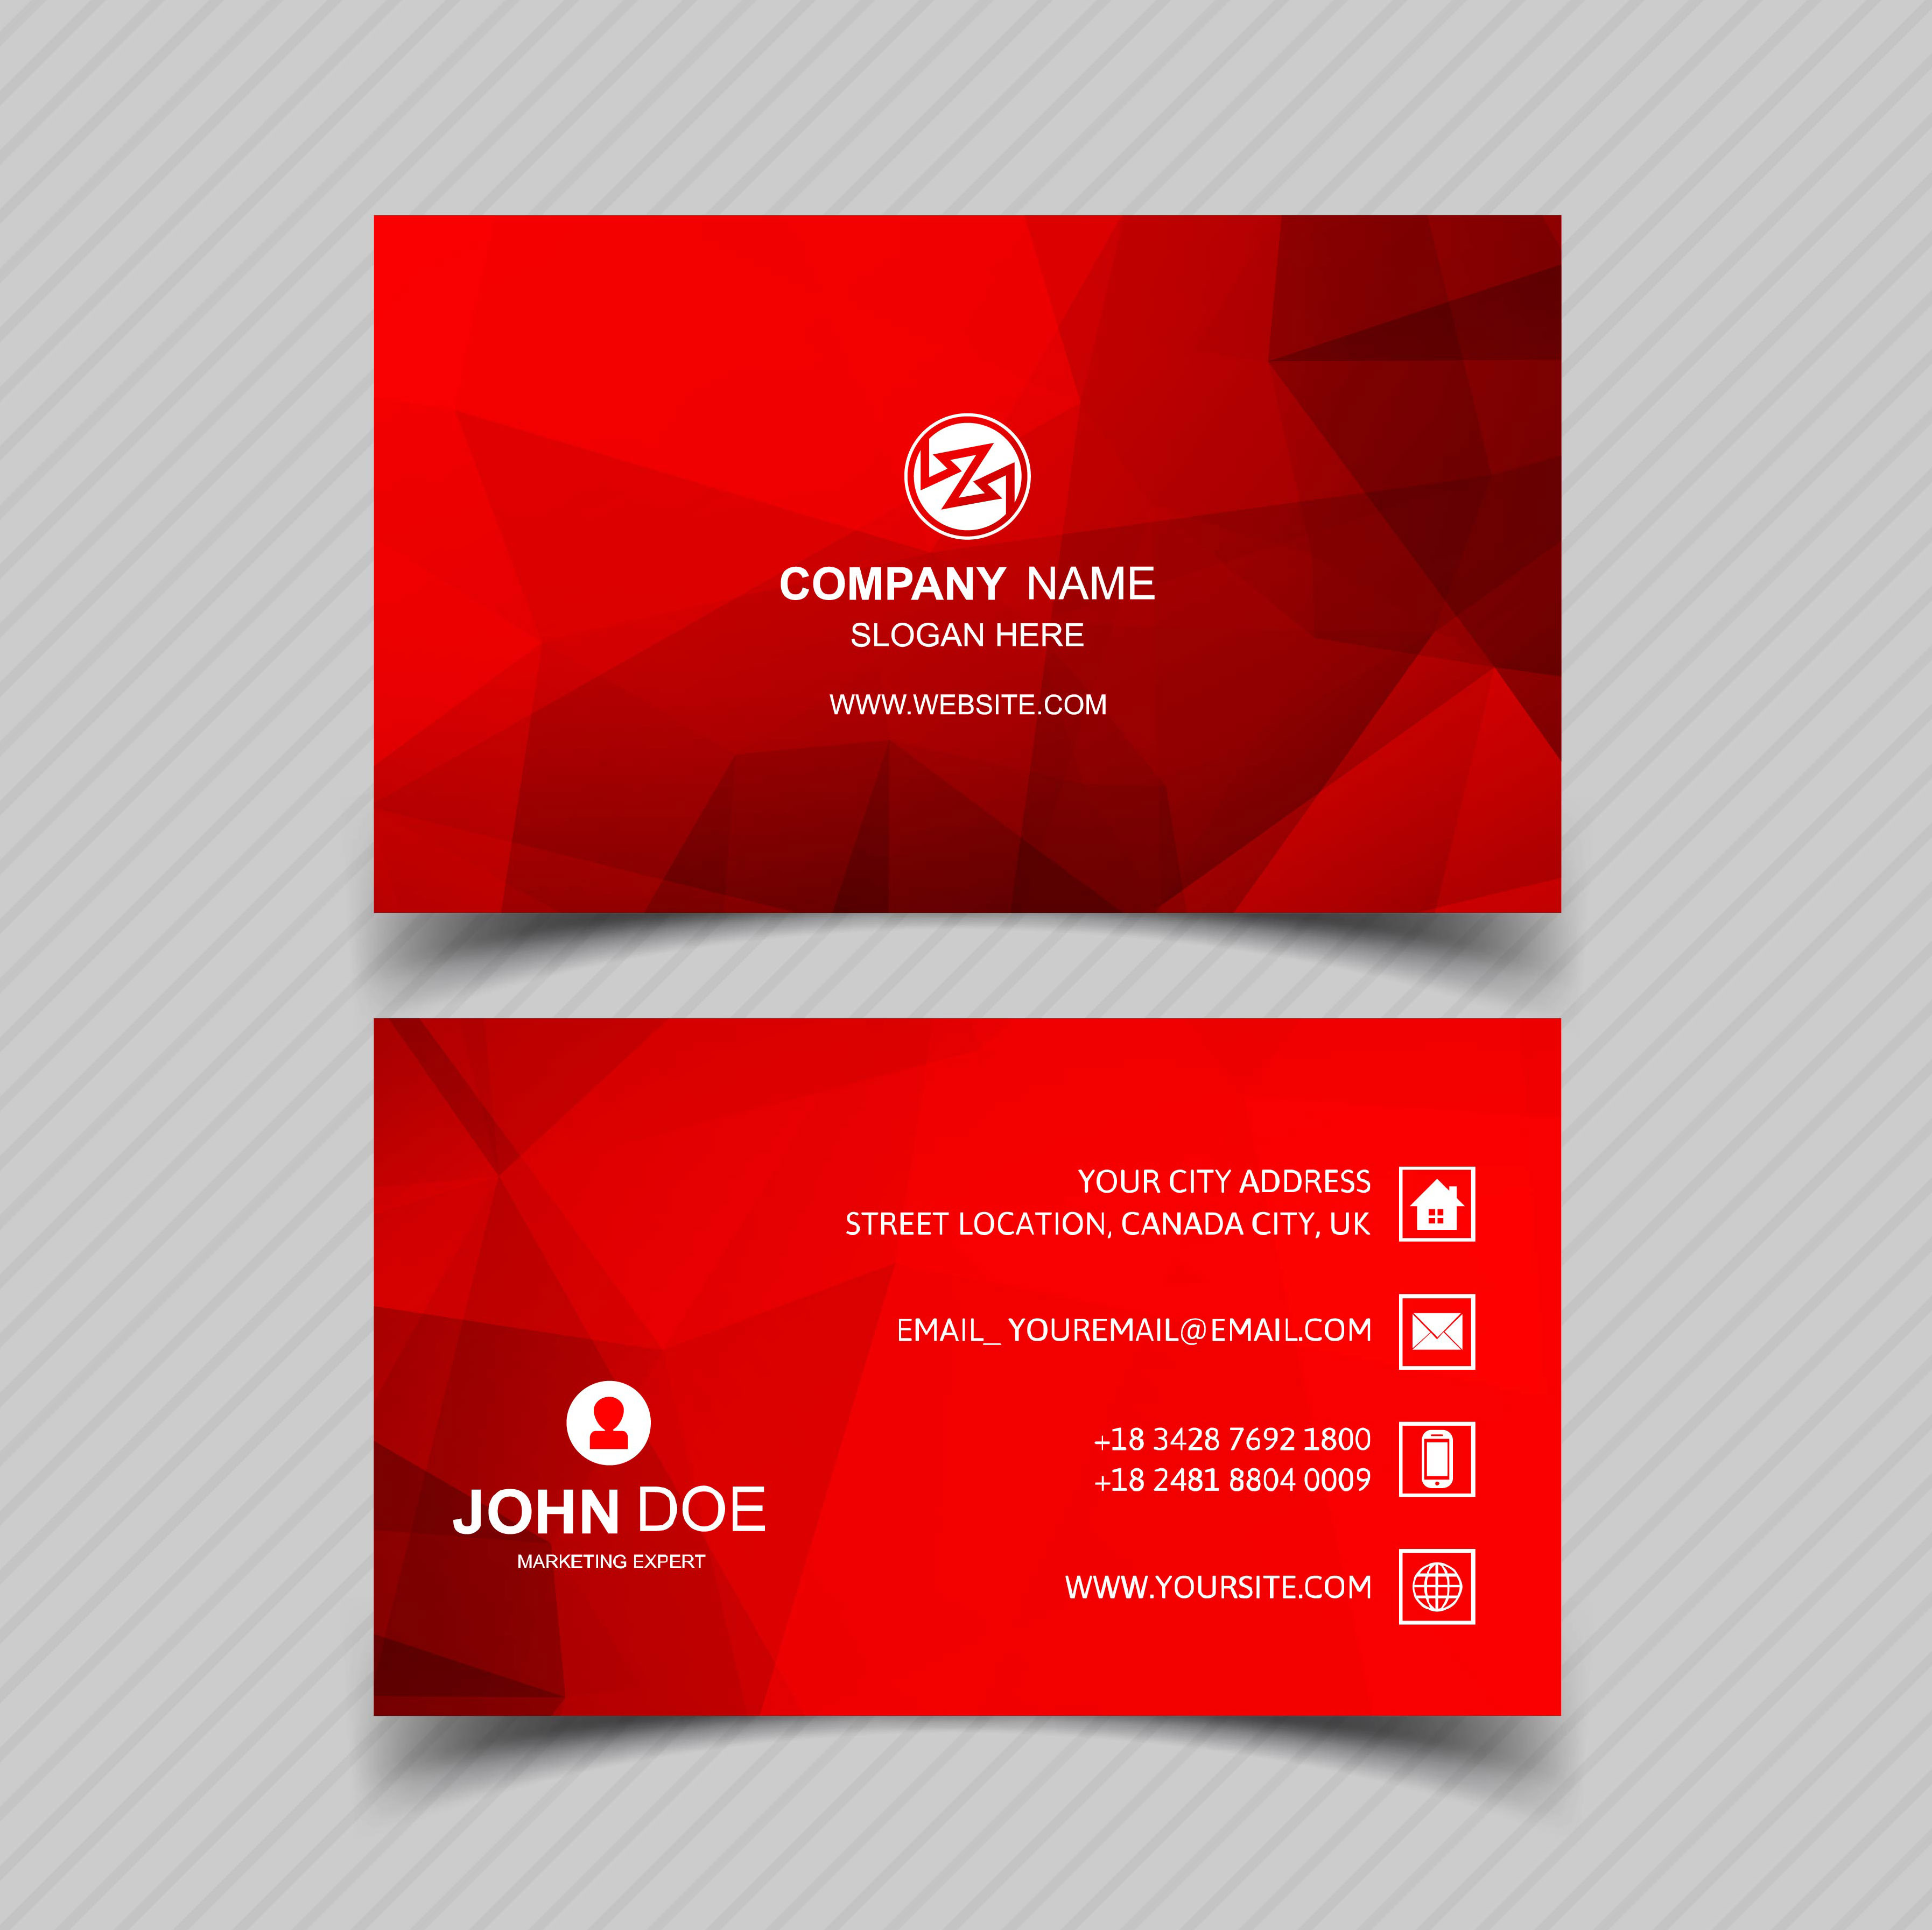 Free business card templates download vector